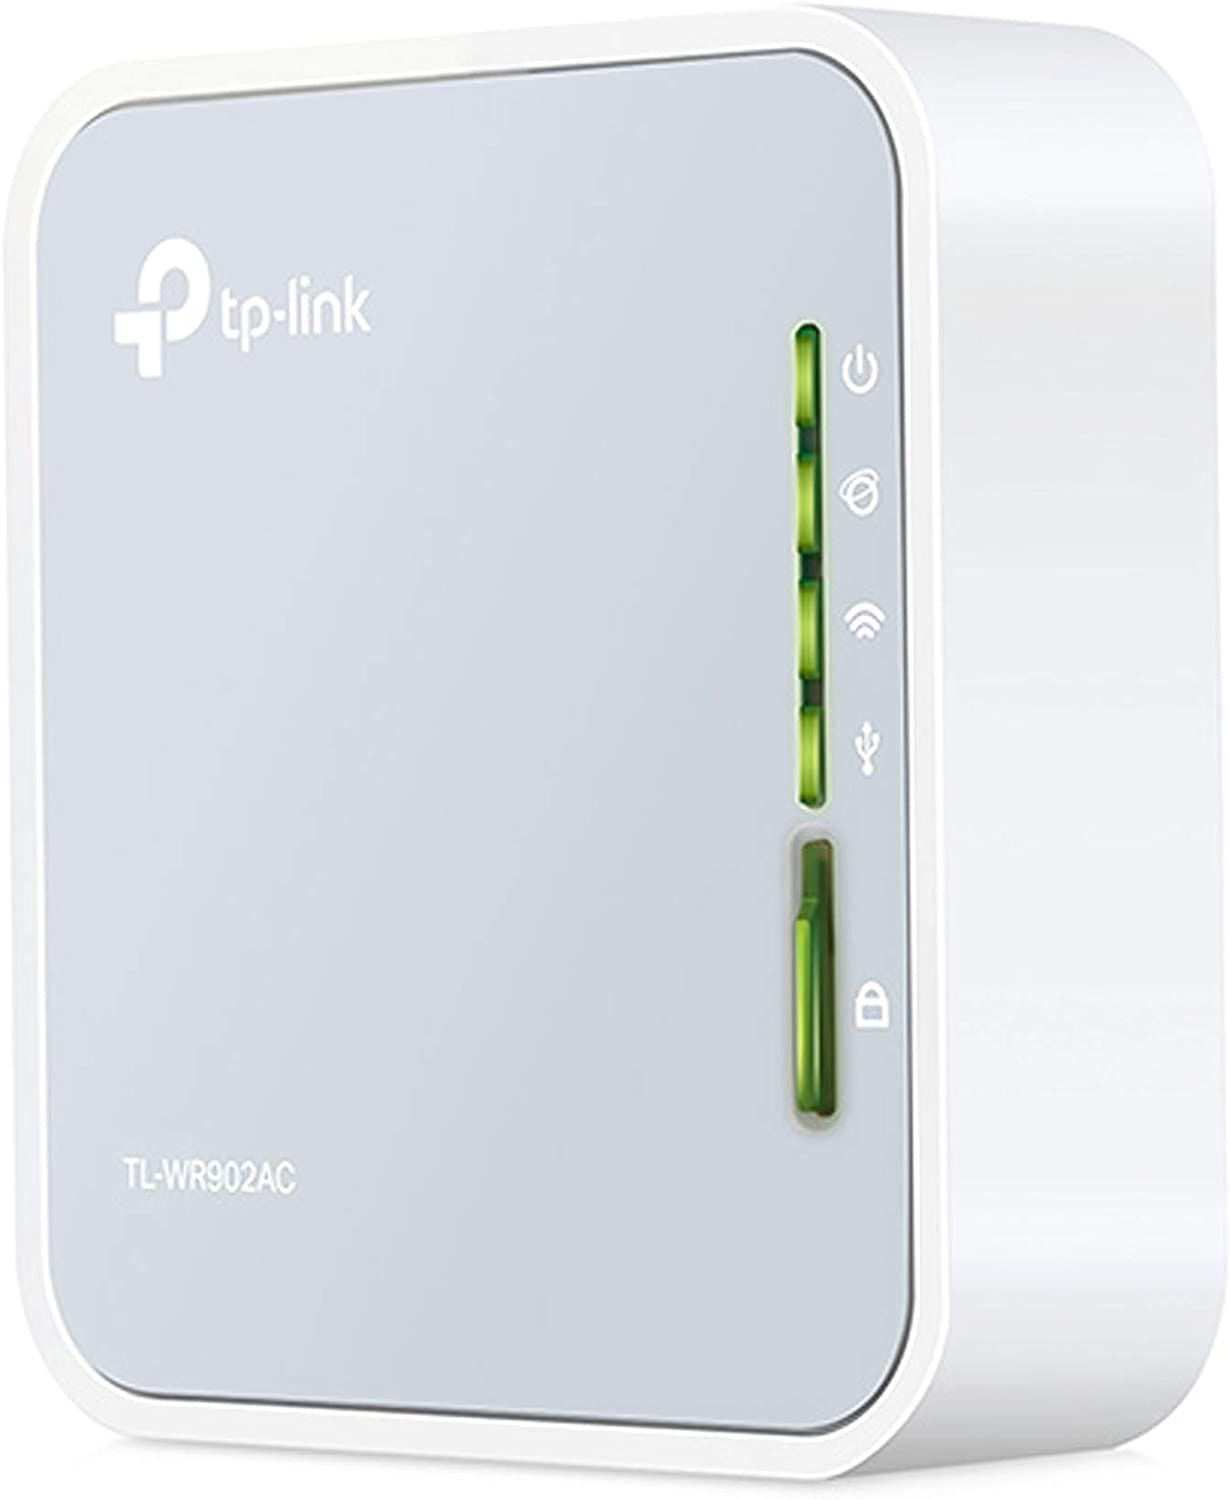 A TP-Link AC750 standing on its side